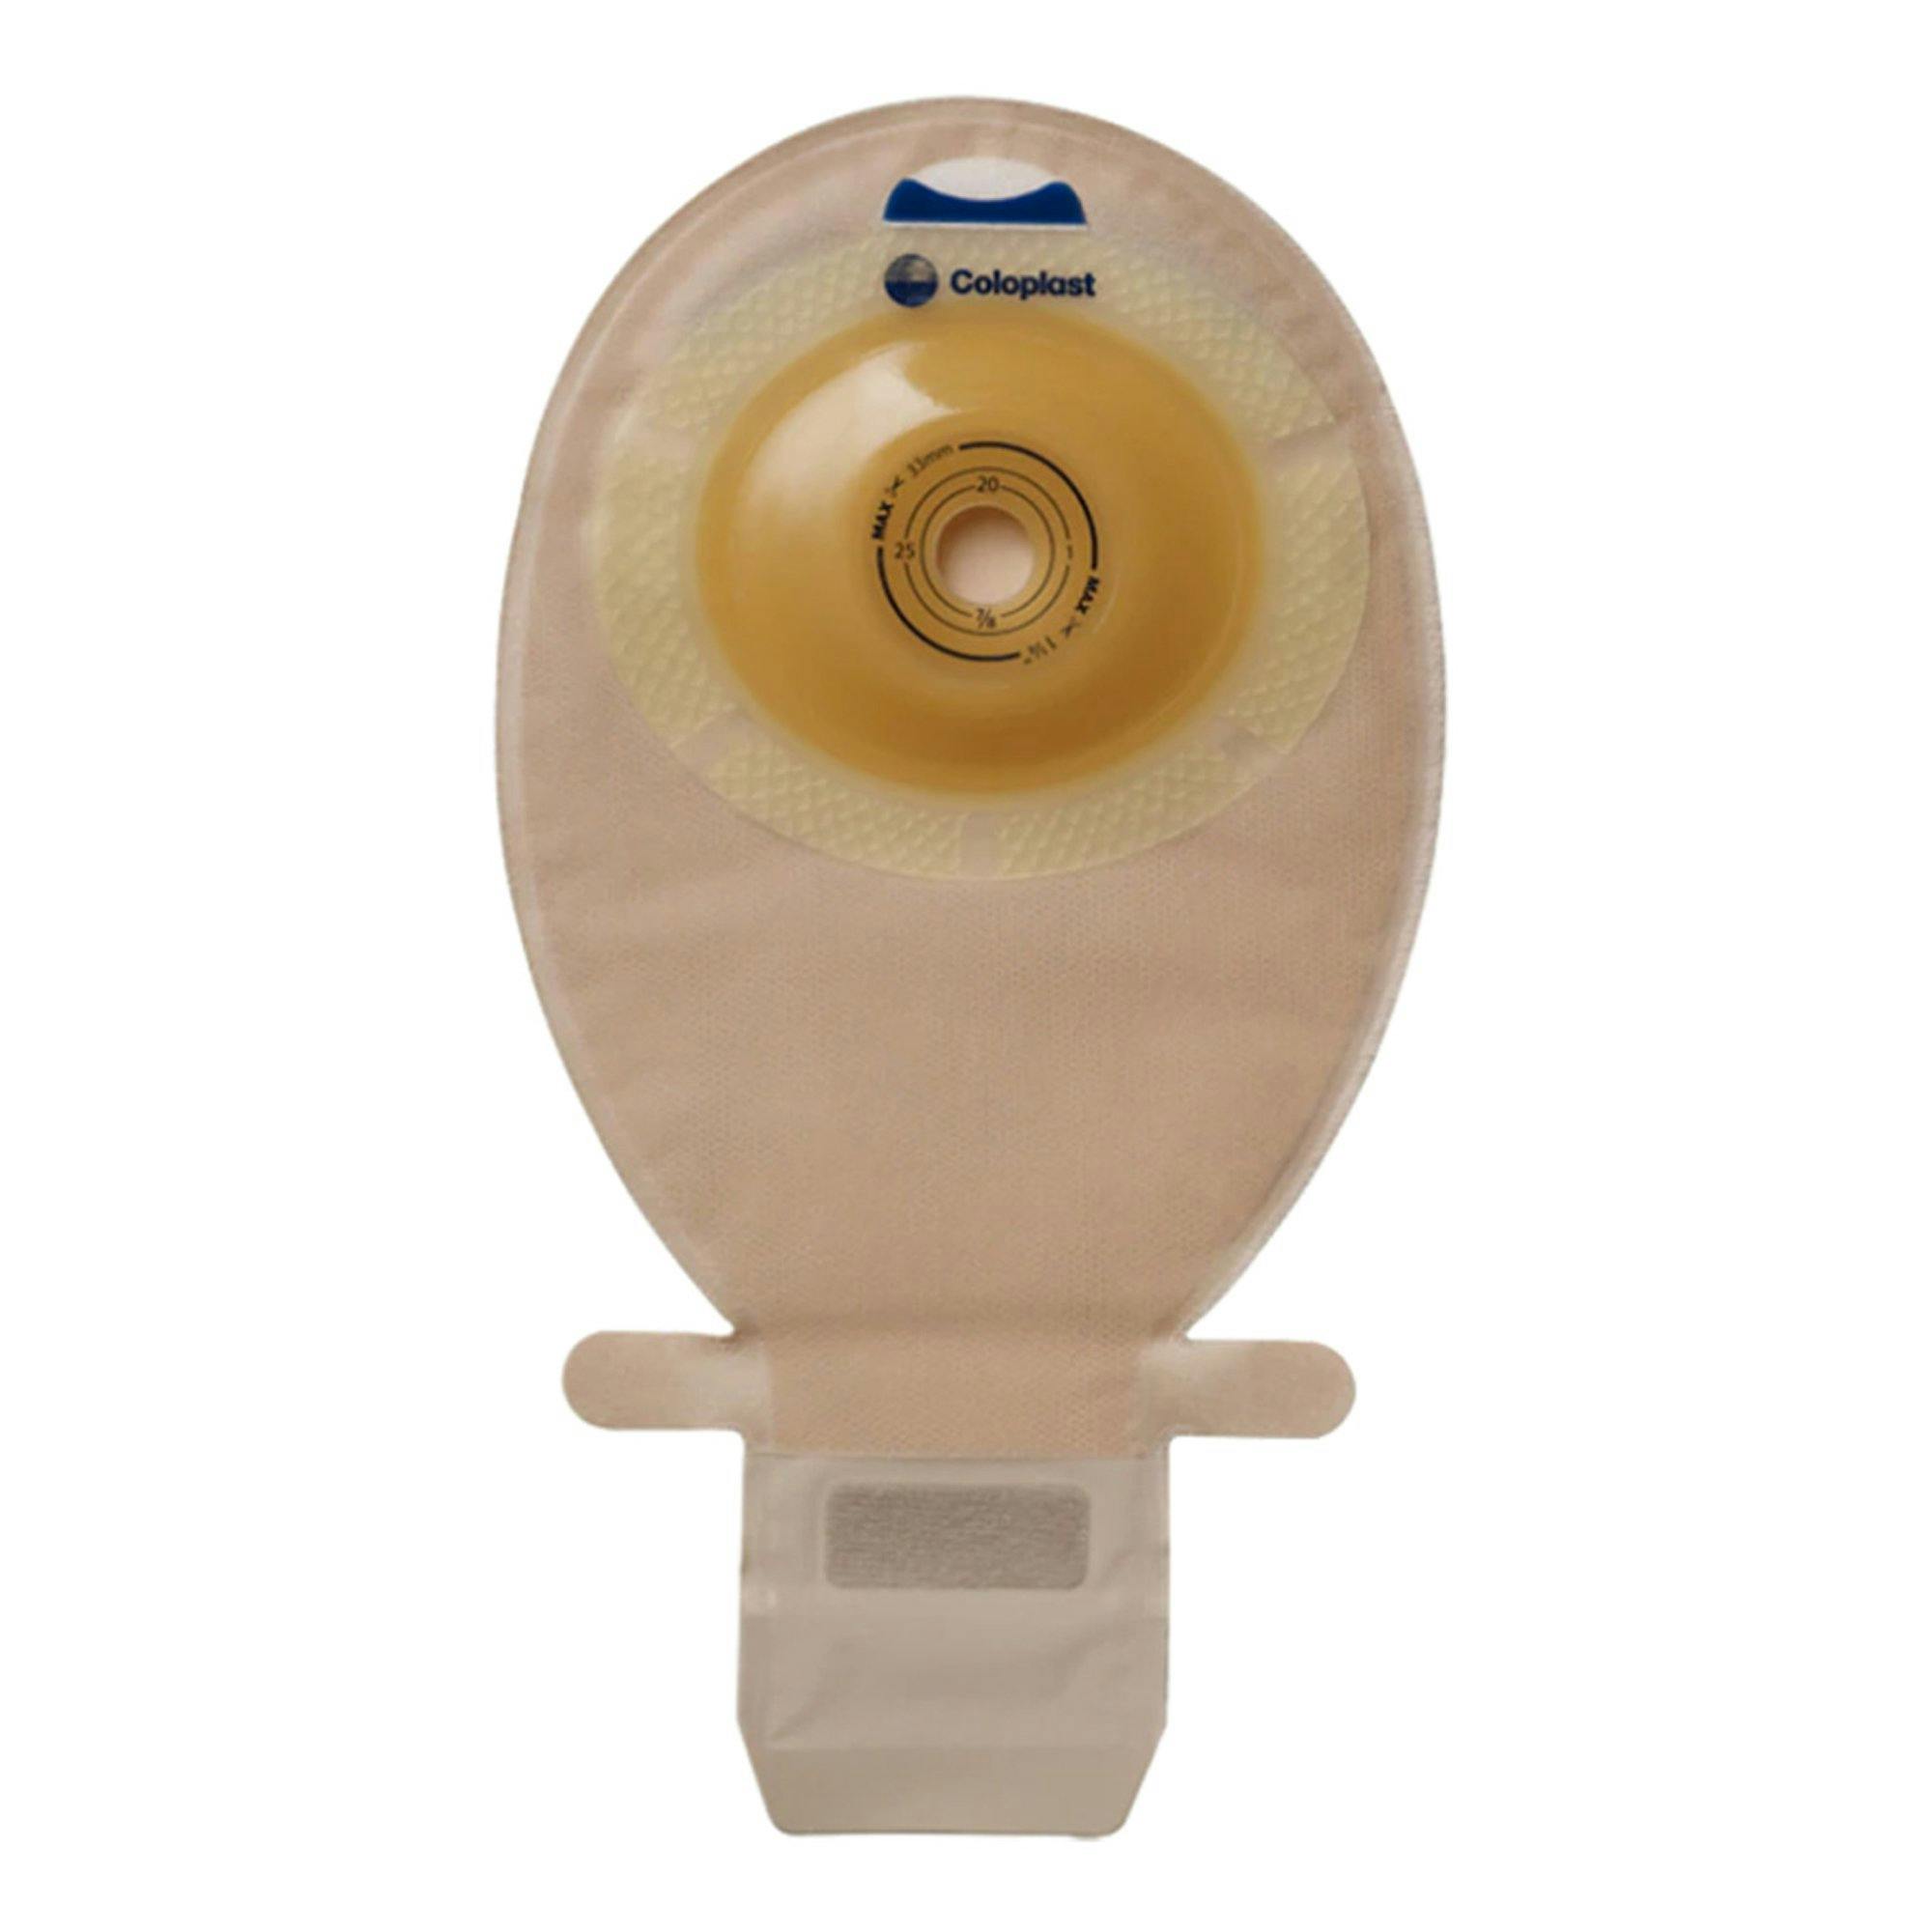 SenSura EasiClose One-Piece System Ostomy Pouch, Convex Light, 1" Stoma, 15623, 1 Each